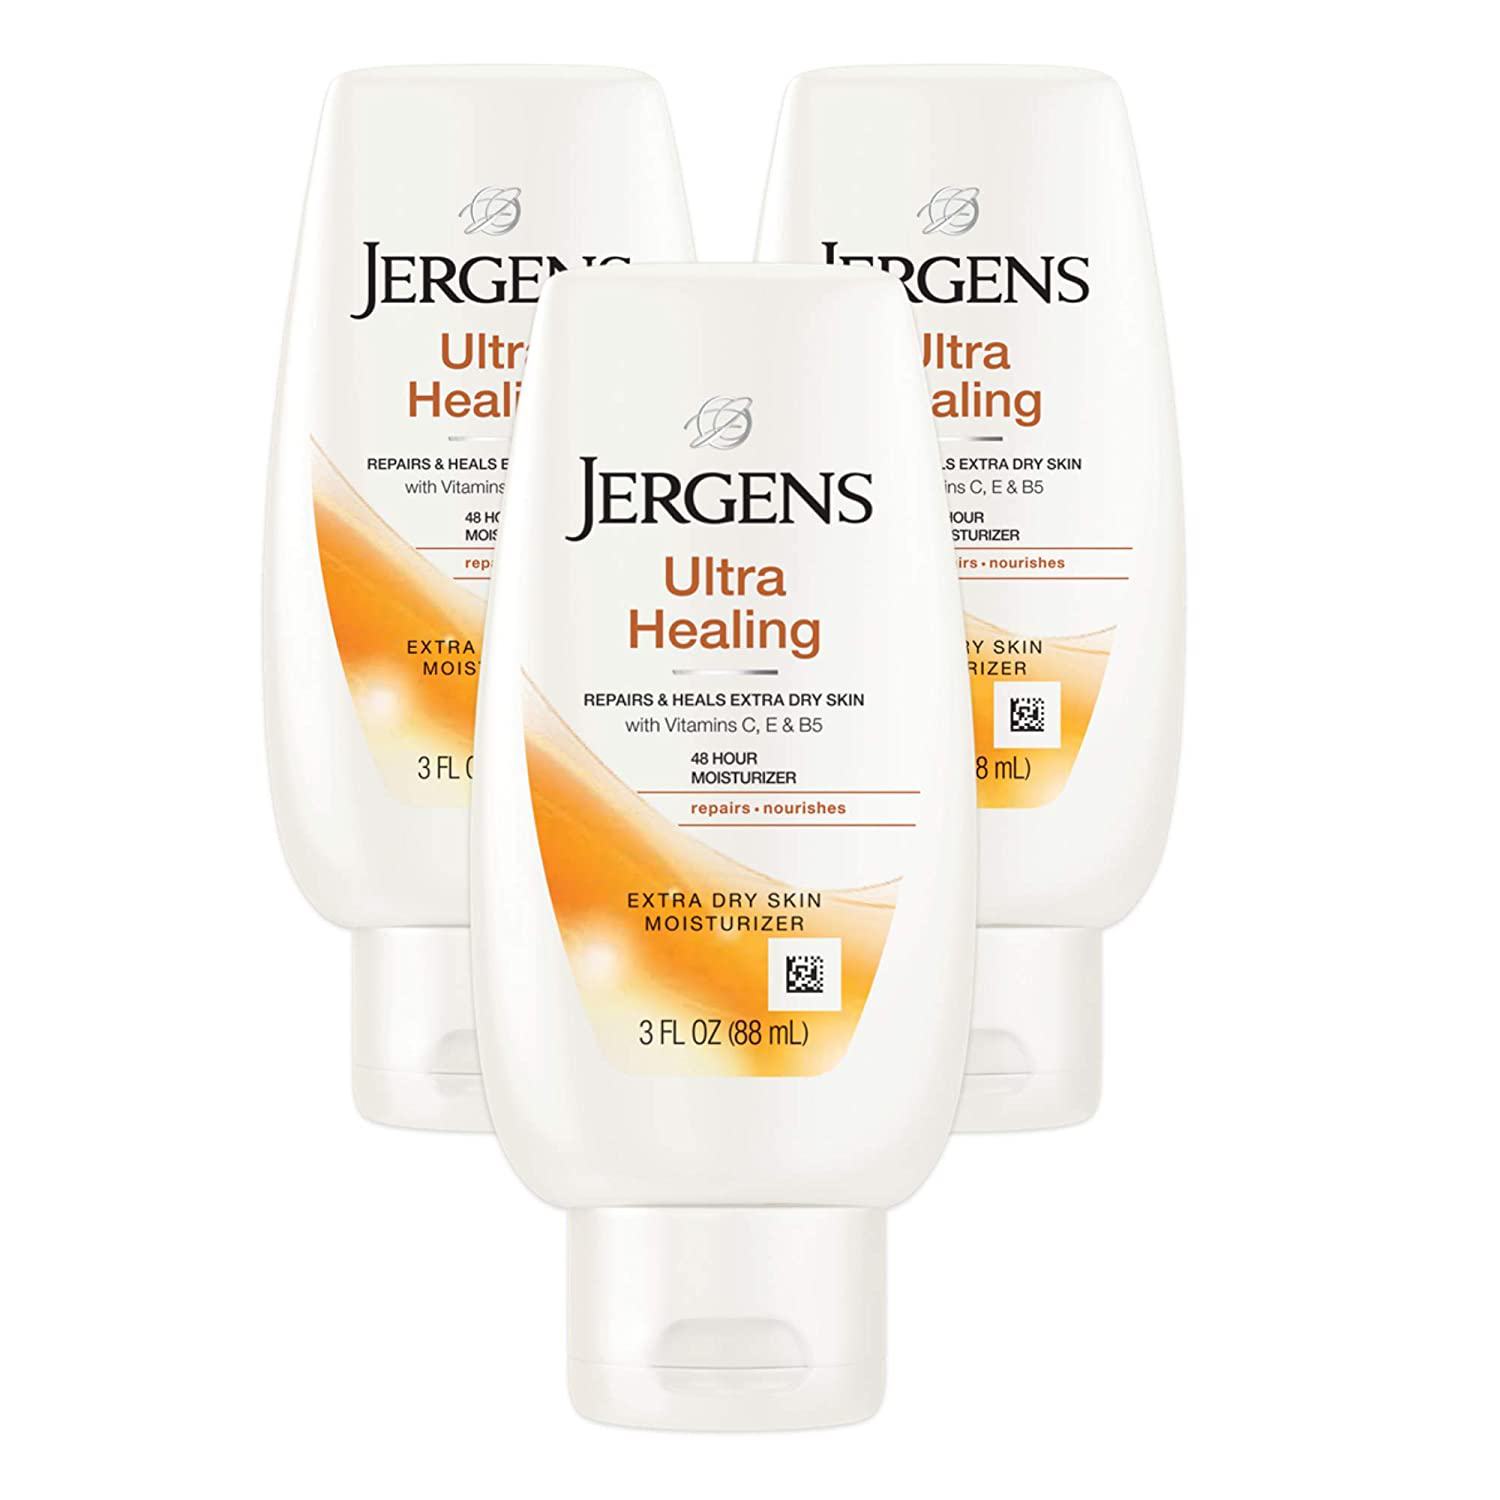 Jergens Ultra Healing Dry Skin Moisturizer, Travel Size Body and Hand Lotion, for Absorption into Extra Dry Skin, Use After Washing Hands, 1 Ounce, 24-pack, with HYDRALUCENCE blend, Vitamins C, E, B5